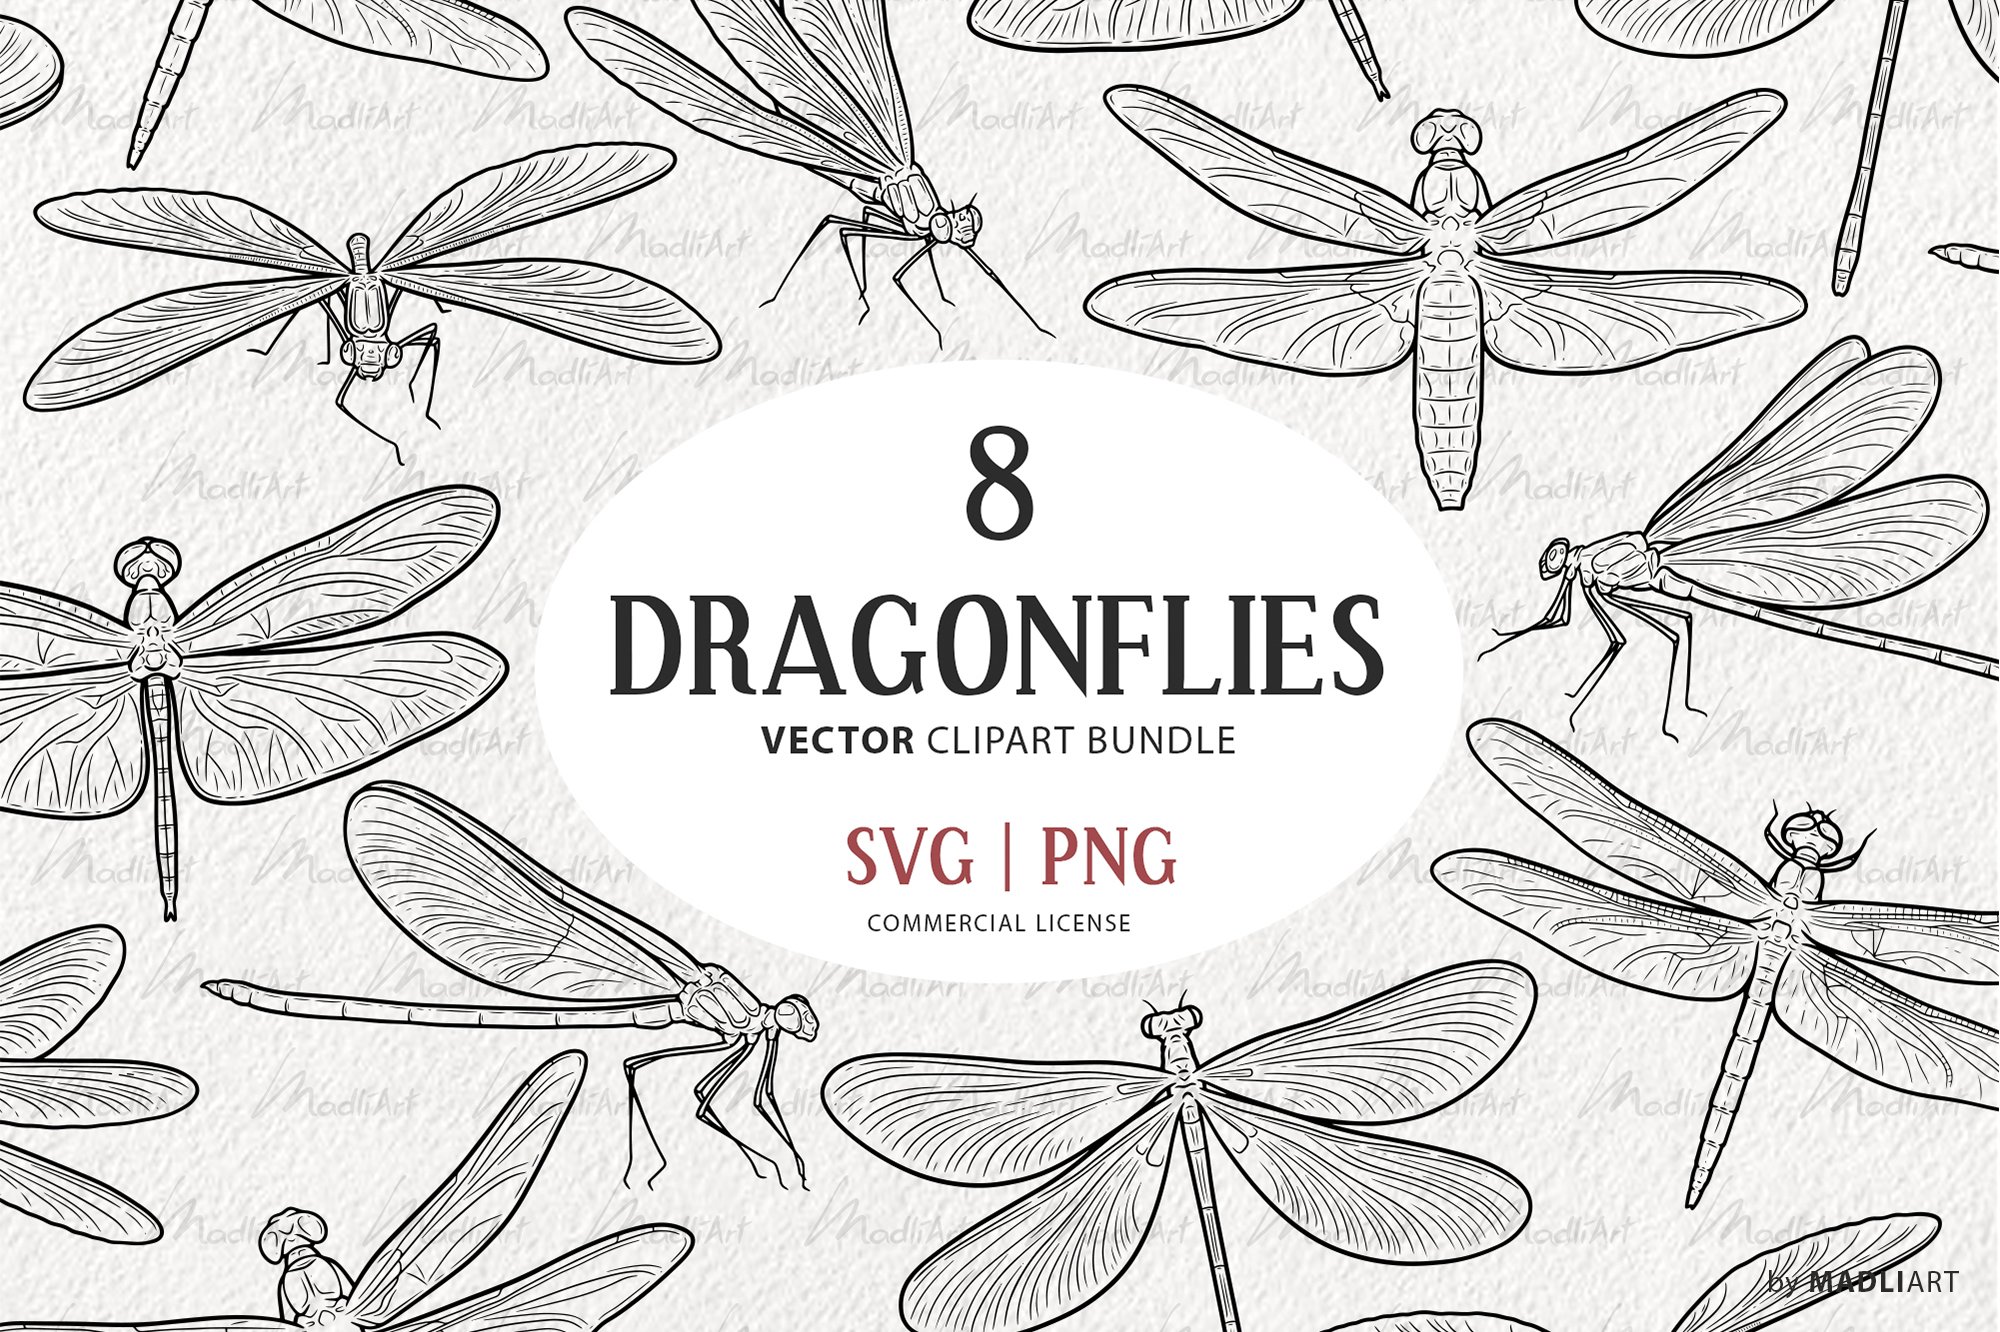 Dragonfly Vector Line Art Set cover image.